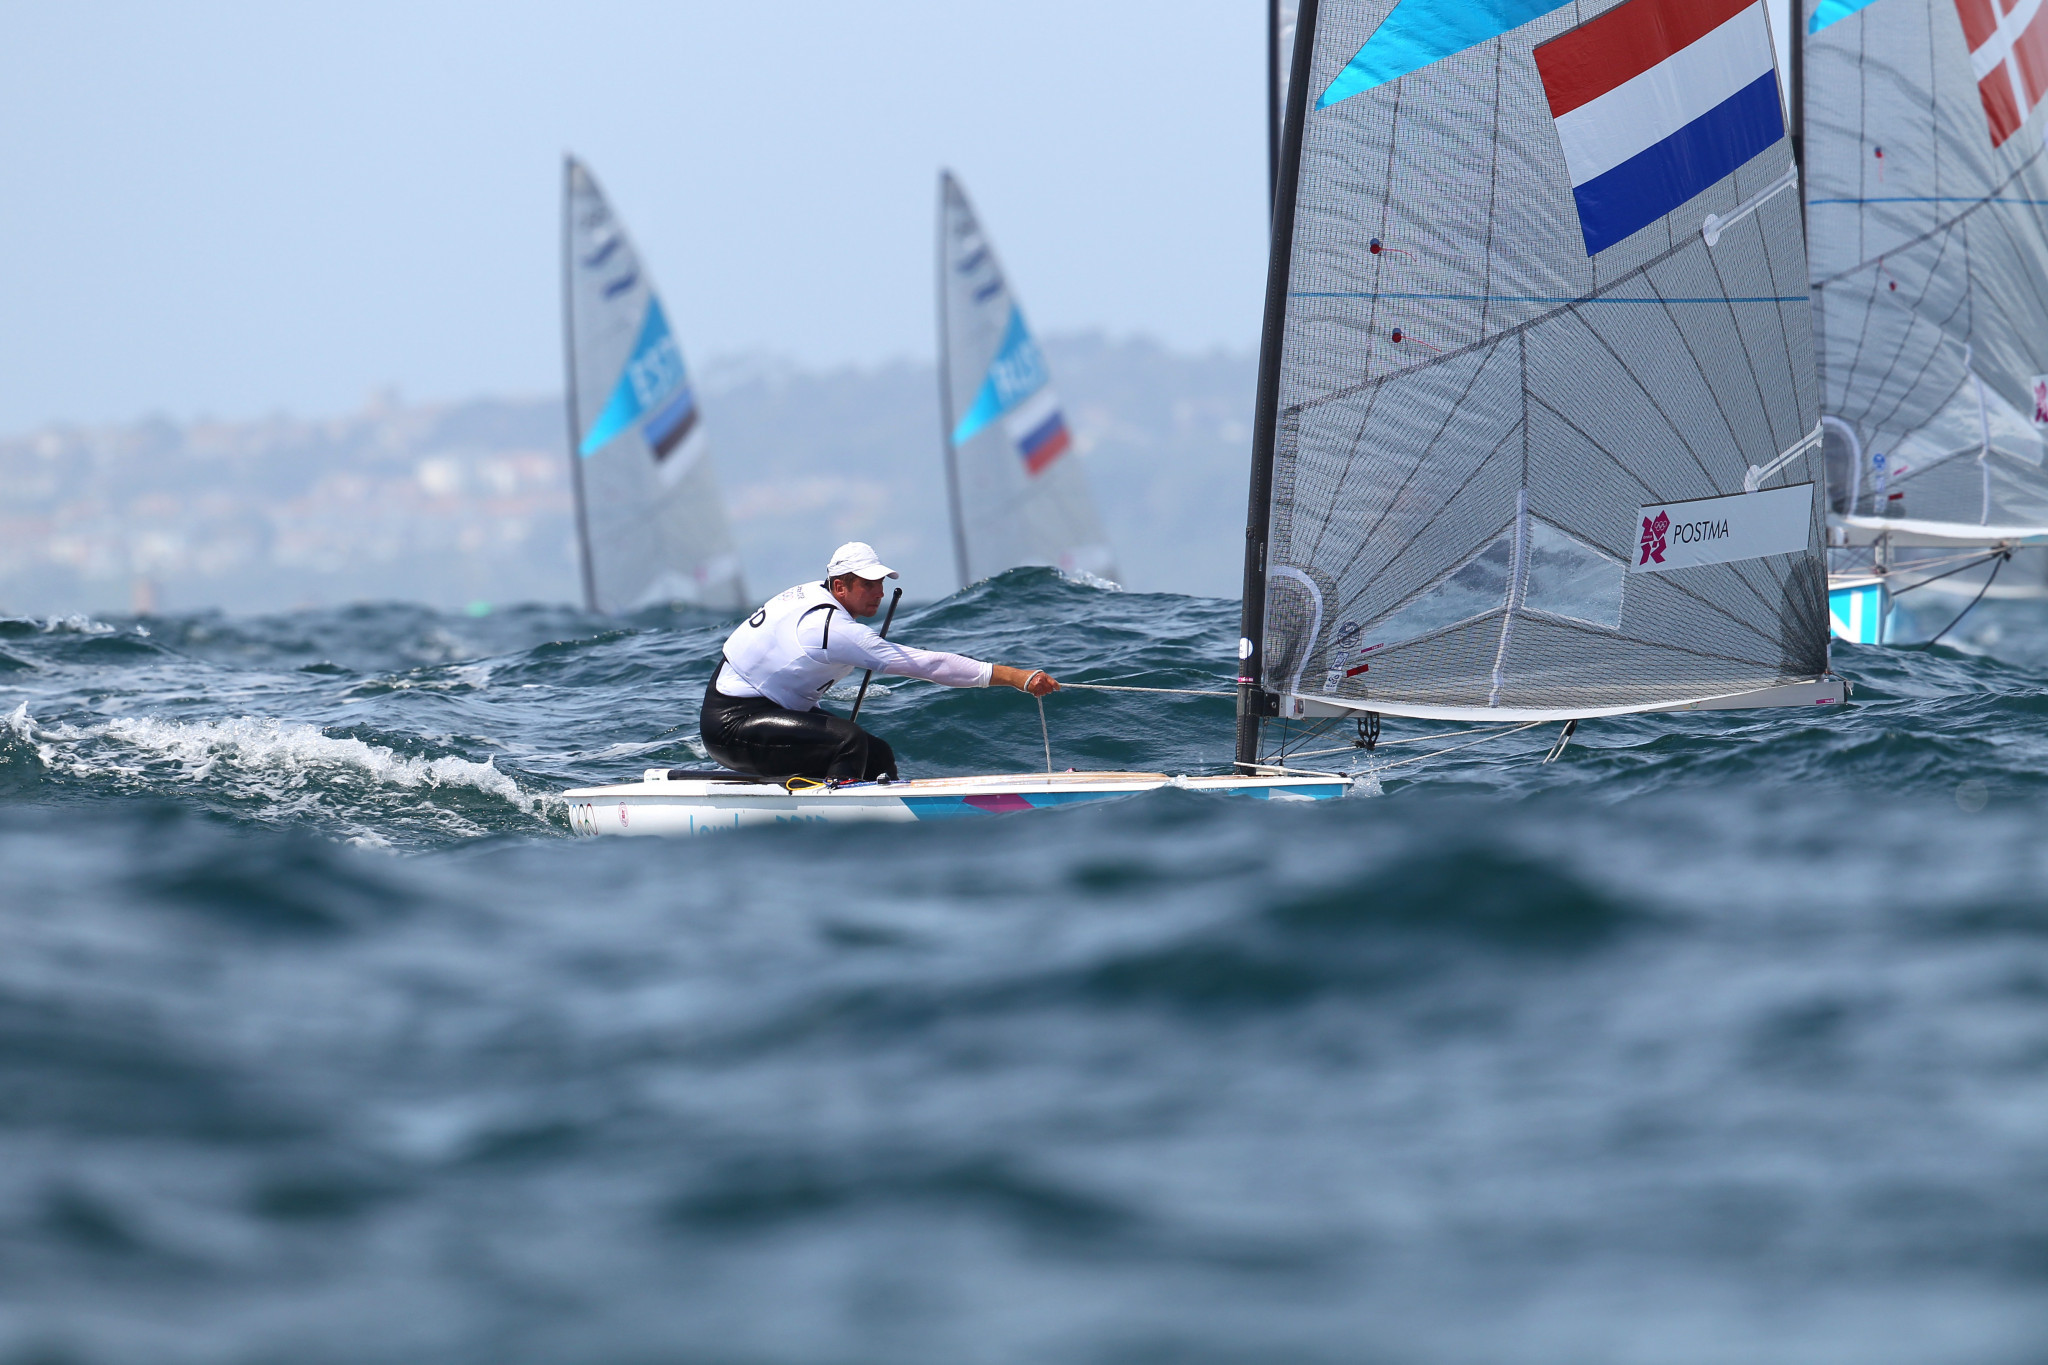 Olympian Postma takes early lead on first day of sailing at Finn Gold Cup